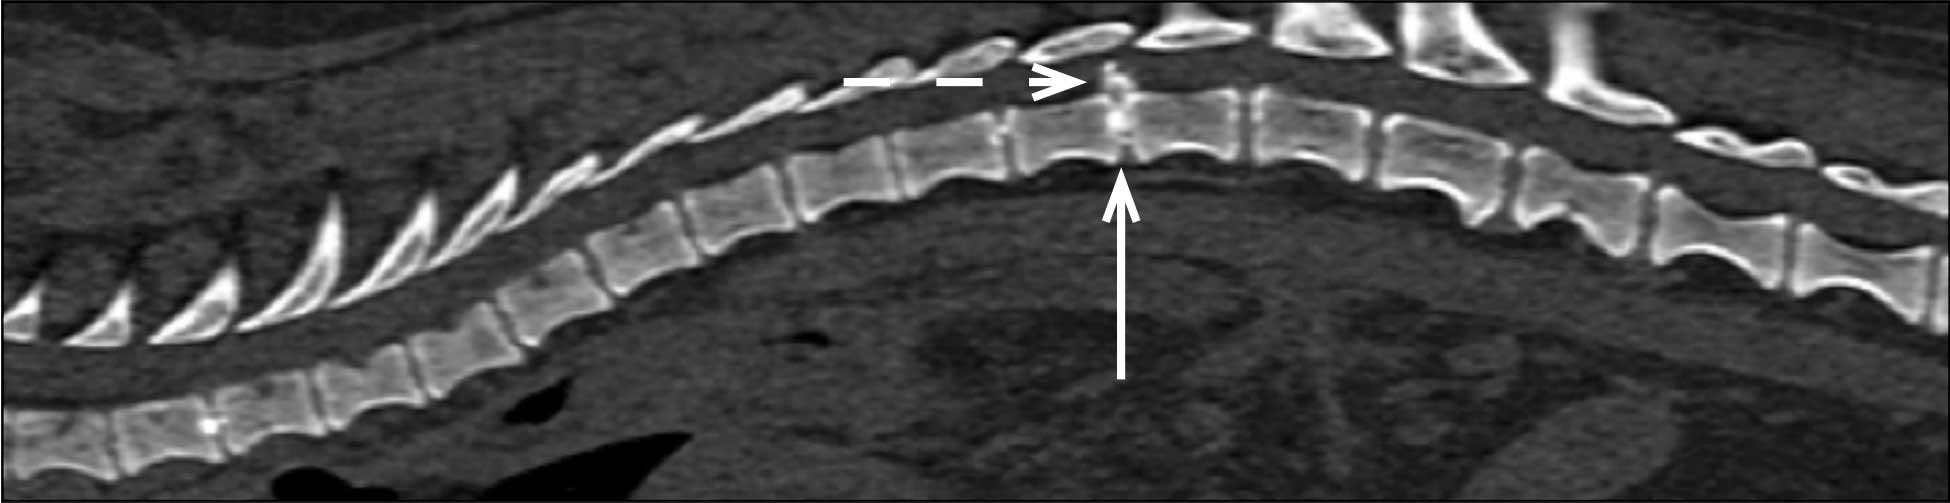 Figure 1. Reconstructed sagittal CT image of the spine in a dachshund with intervertebral disc herniation. Note the abnormal disc calcification (solid white arrows) caused by chondroid metaplasia and herniation into the spinal canal (dashed arrow).